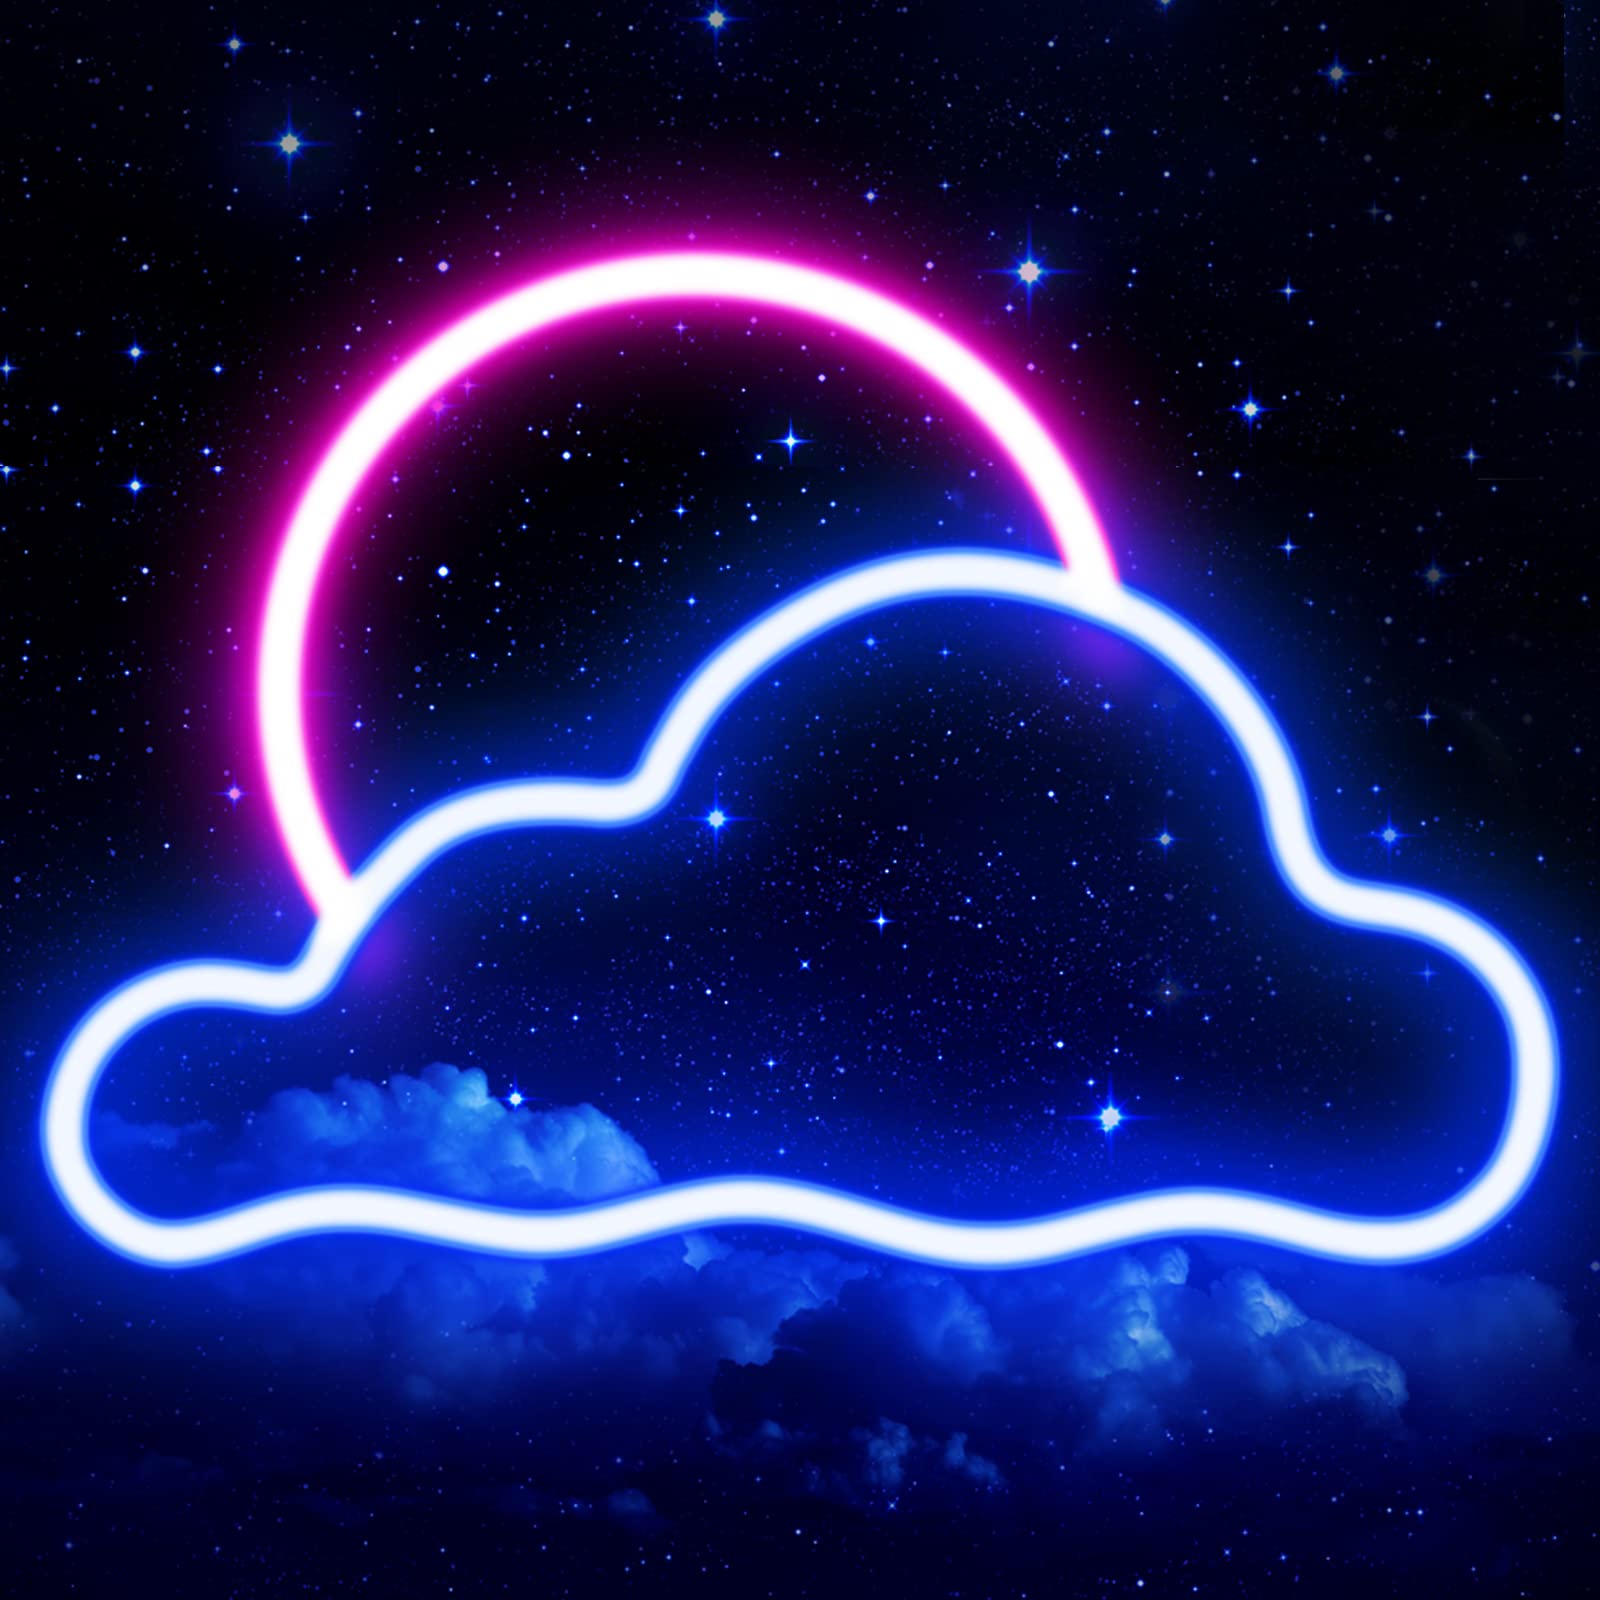 Neon Sign, Cloud and Sun Led Neon Signs Wall Light, Battery or USB Powered Light Up Both Sides Neon Light for Bedroom, Kids Room, Home, Bar, Party, Festival, Christmas, Wedding, Amazon.sg: DIY & Tools